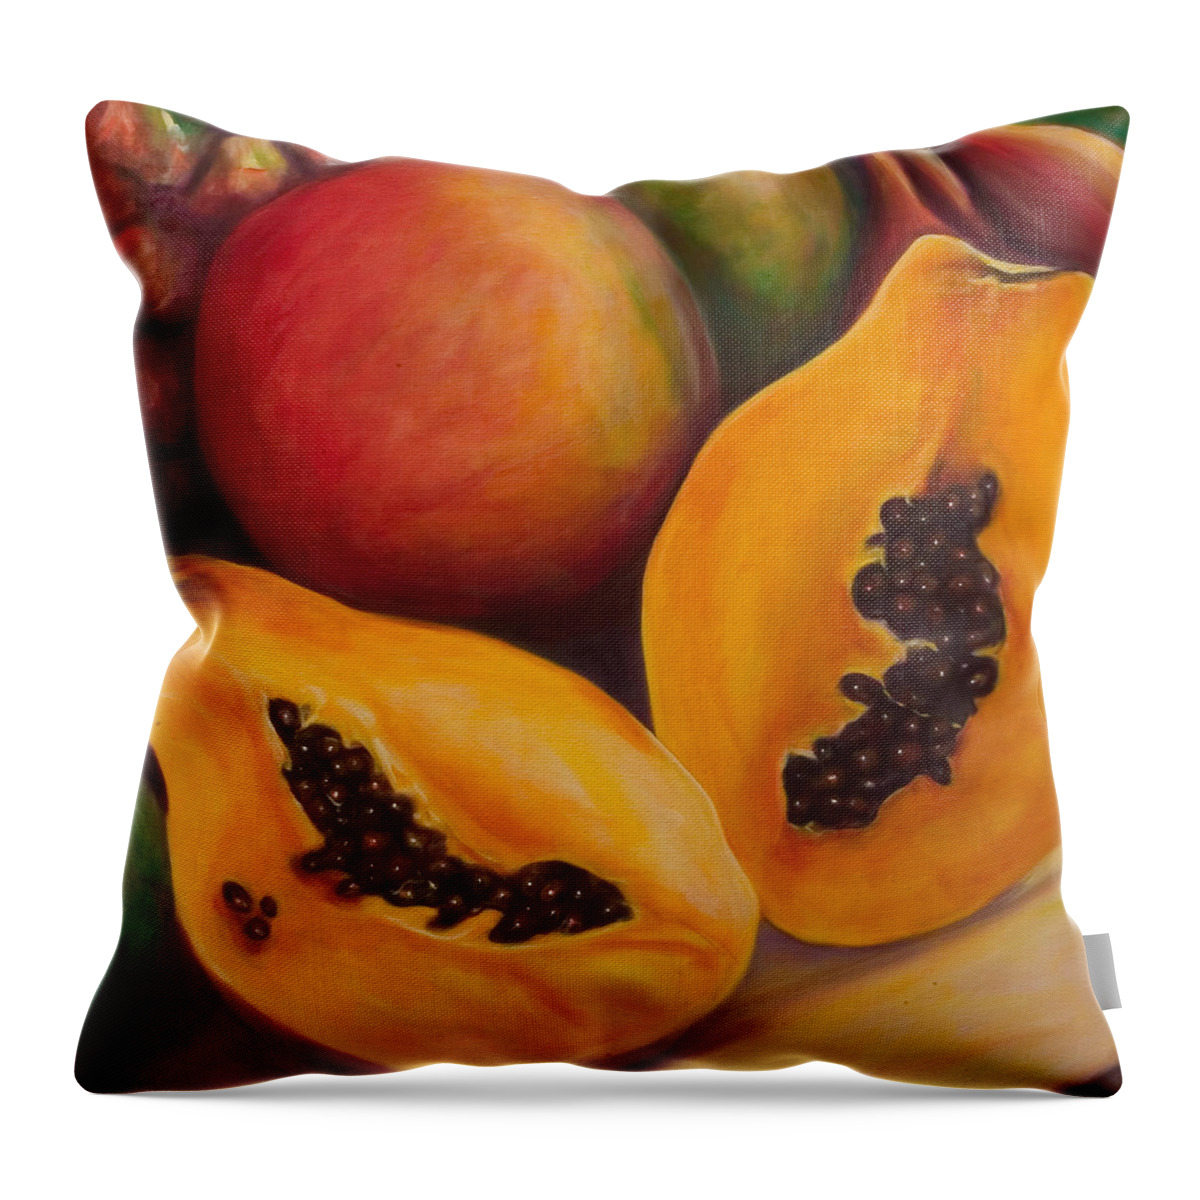 Twins Throw Pillow featuring the painting Twins Crop by Shannon Grissom